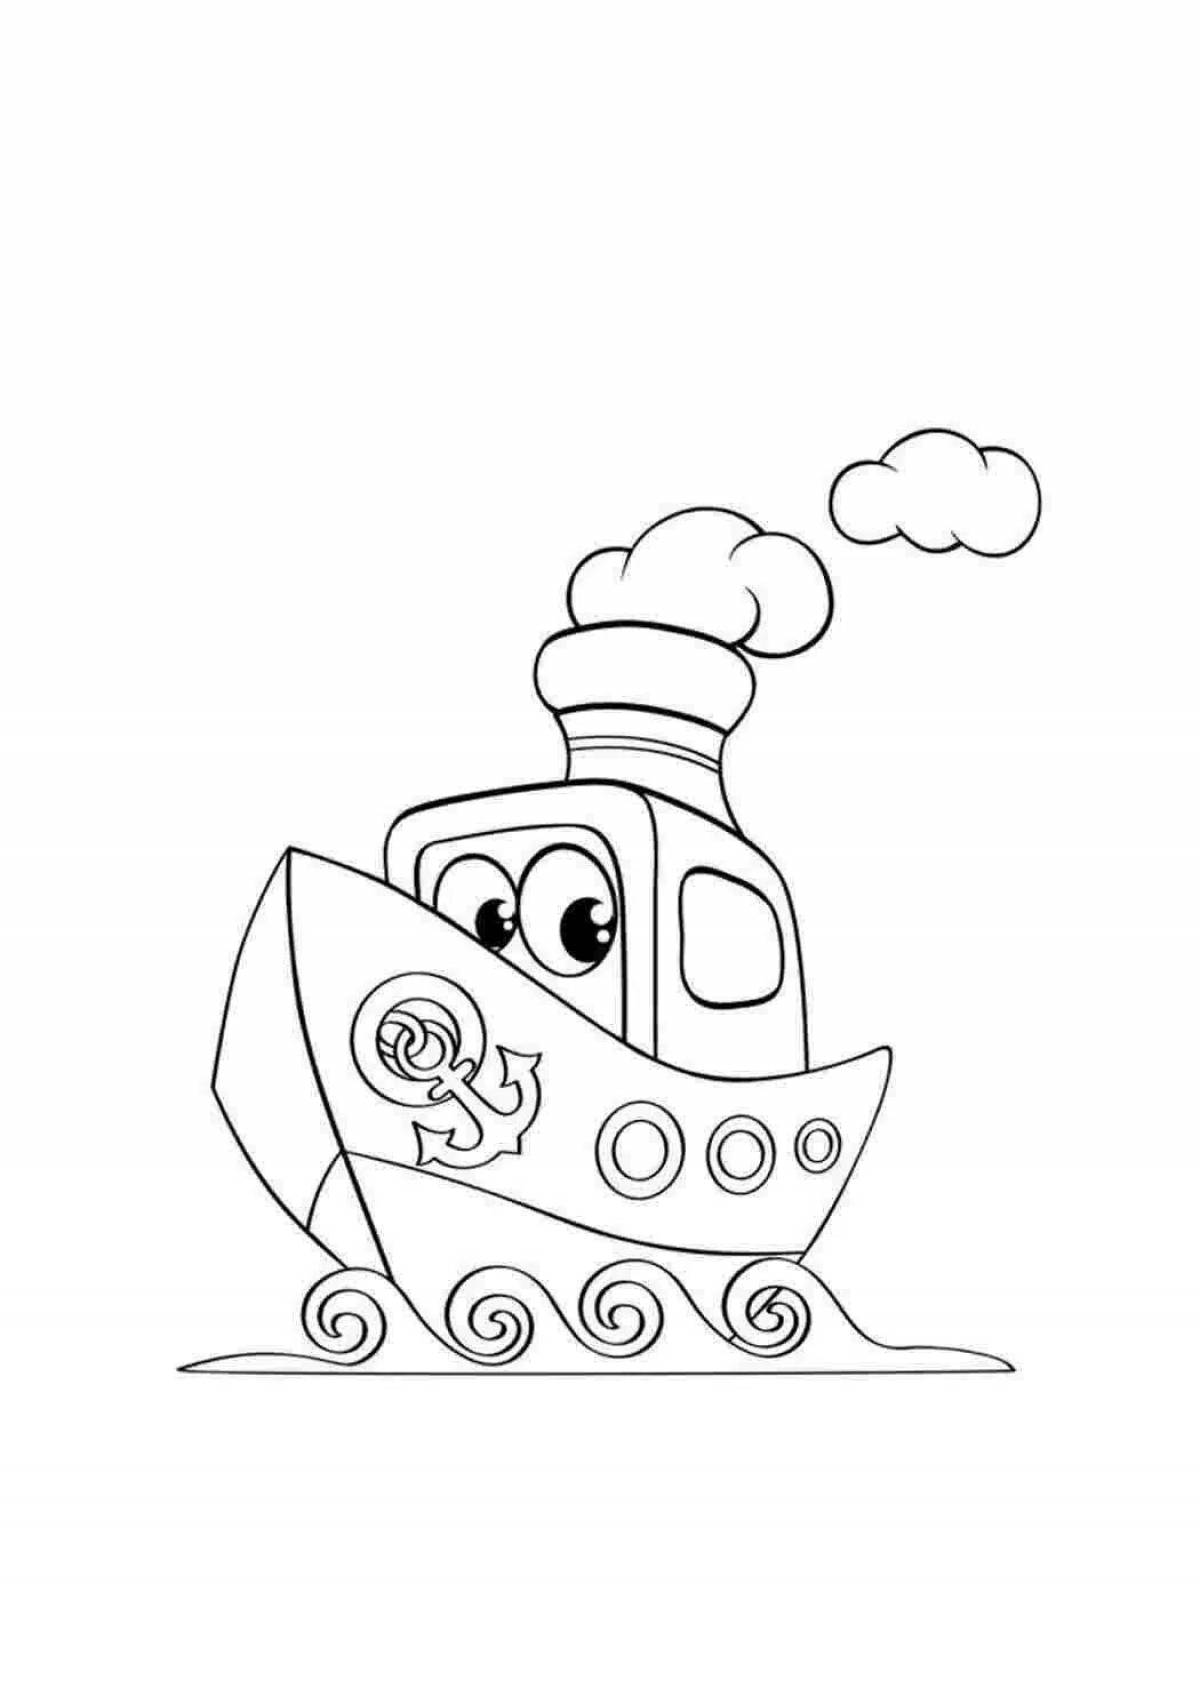 Coloring page funny steamer for kids